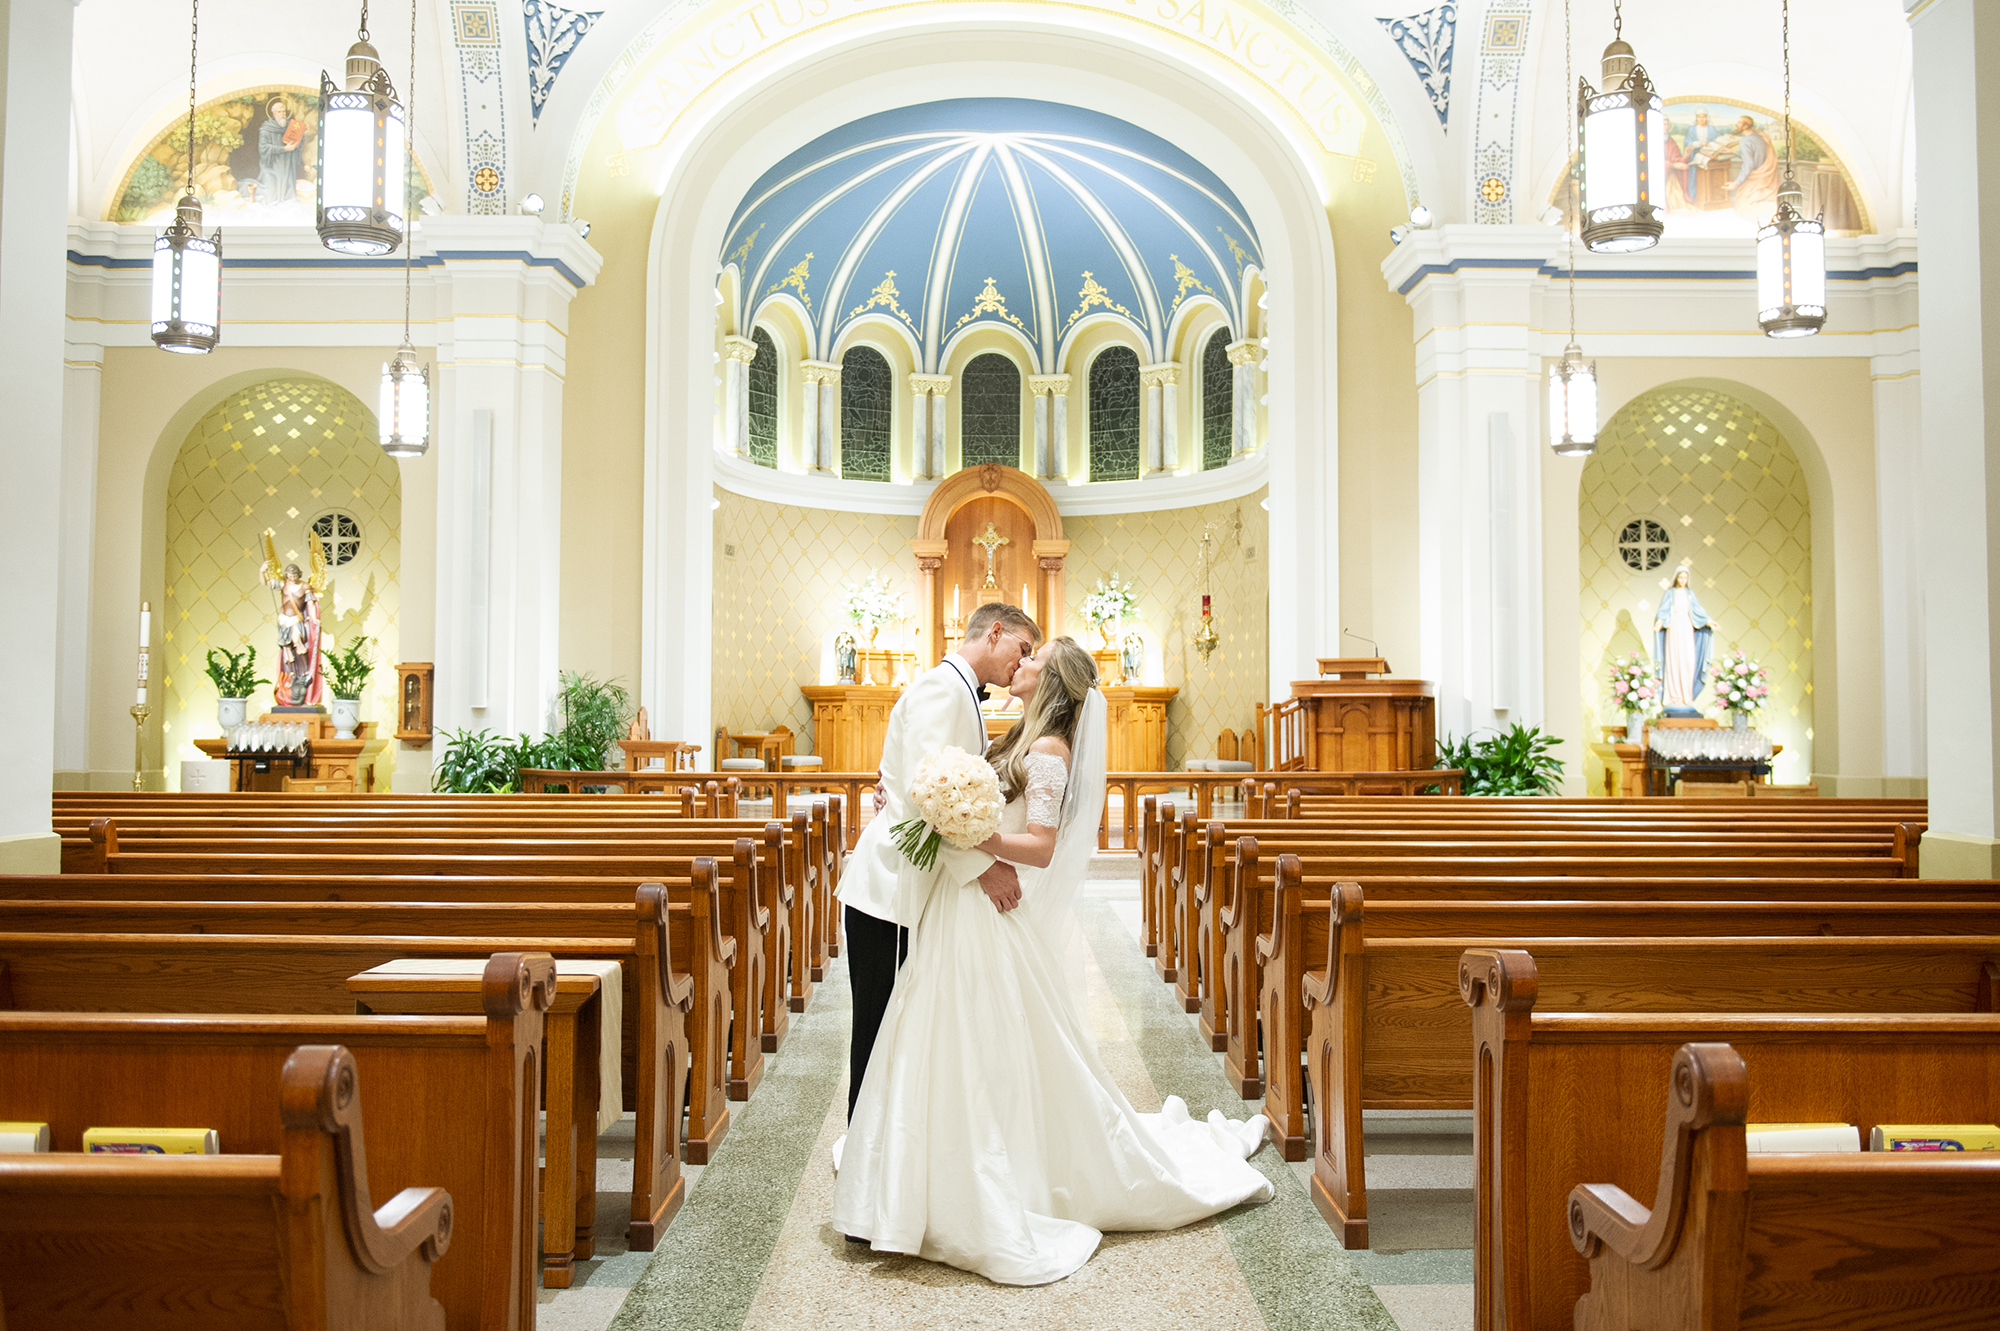 Bride and groom kissing in church